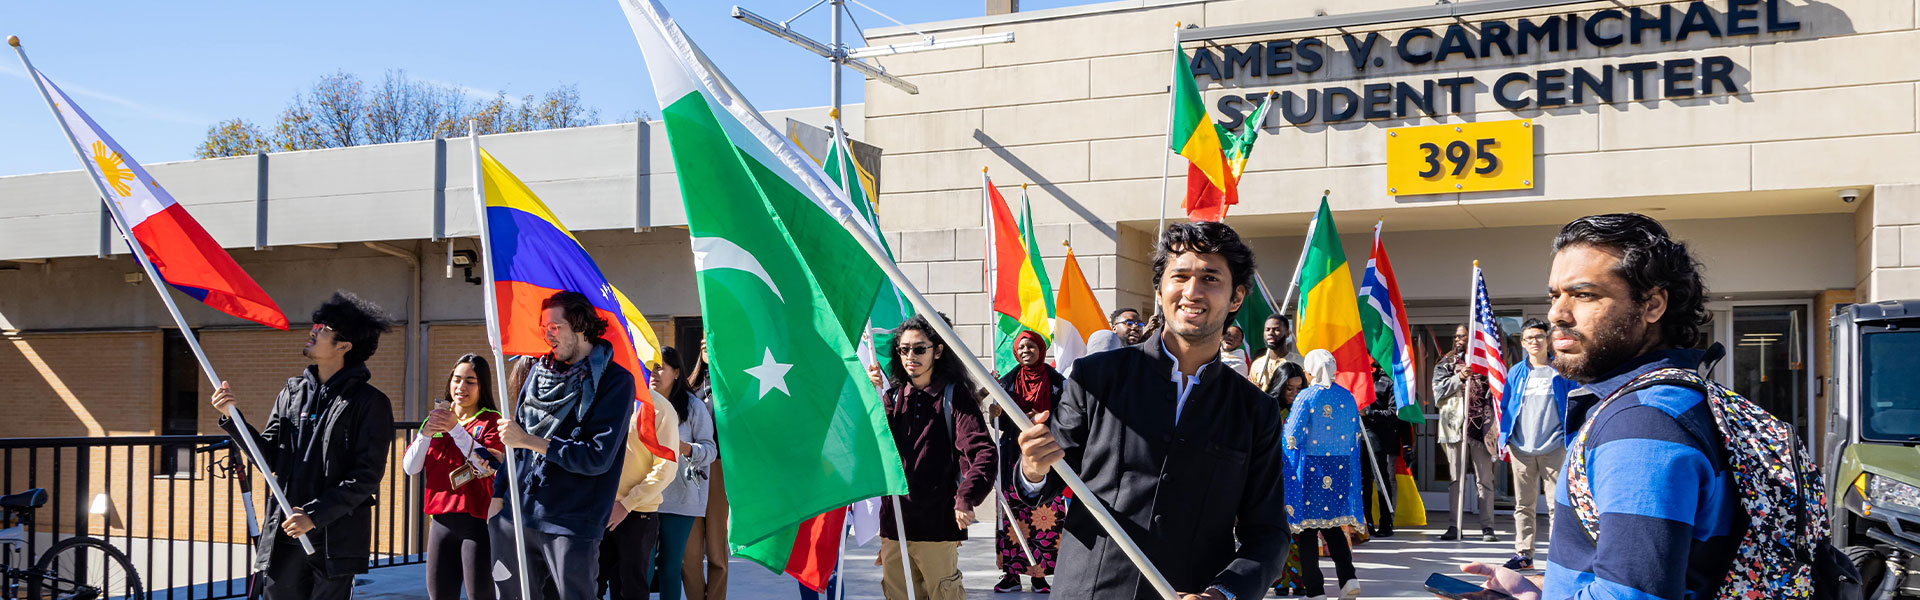 A group of international students outside the Kennesaw Student Center waving international flags